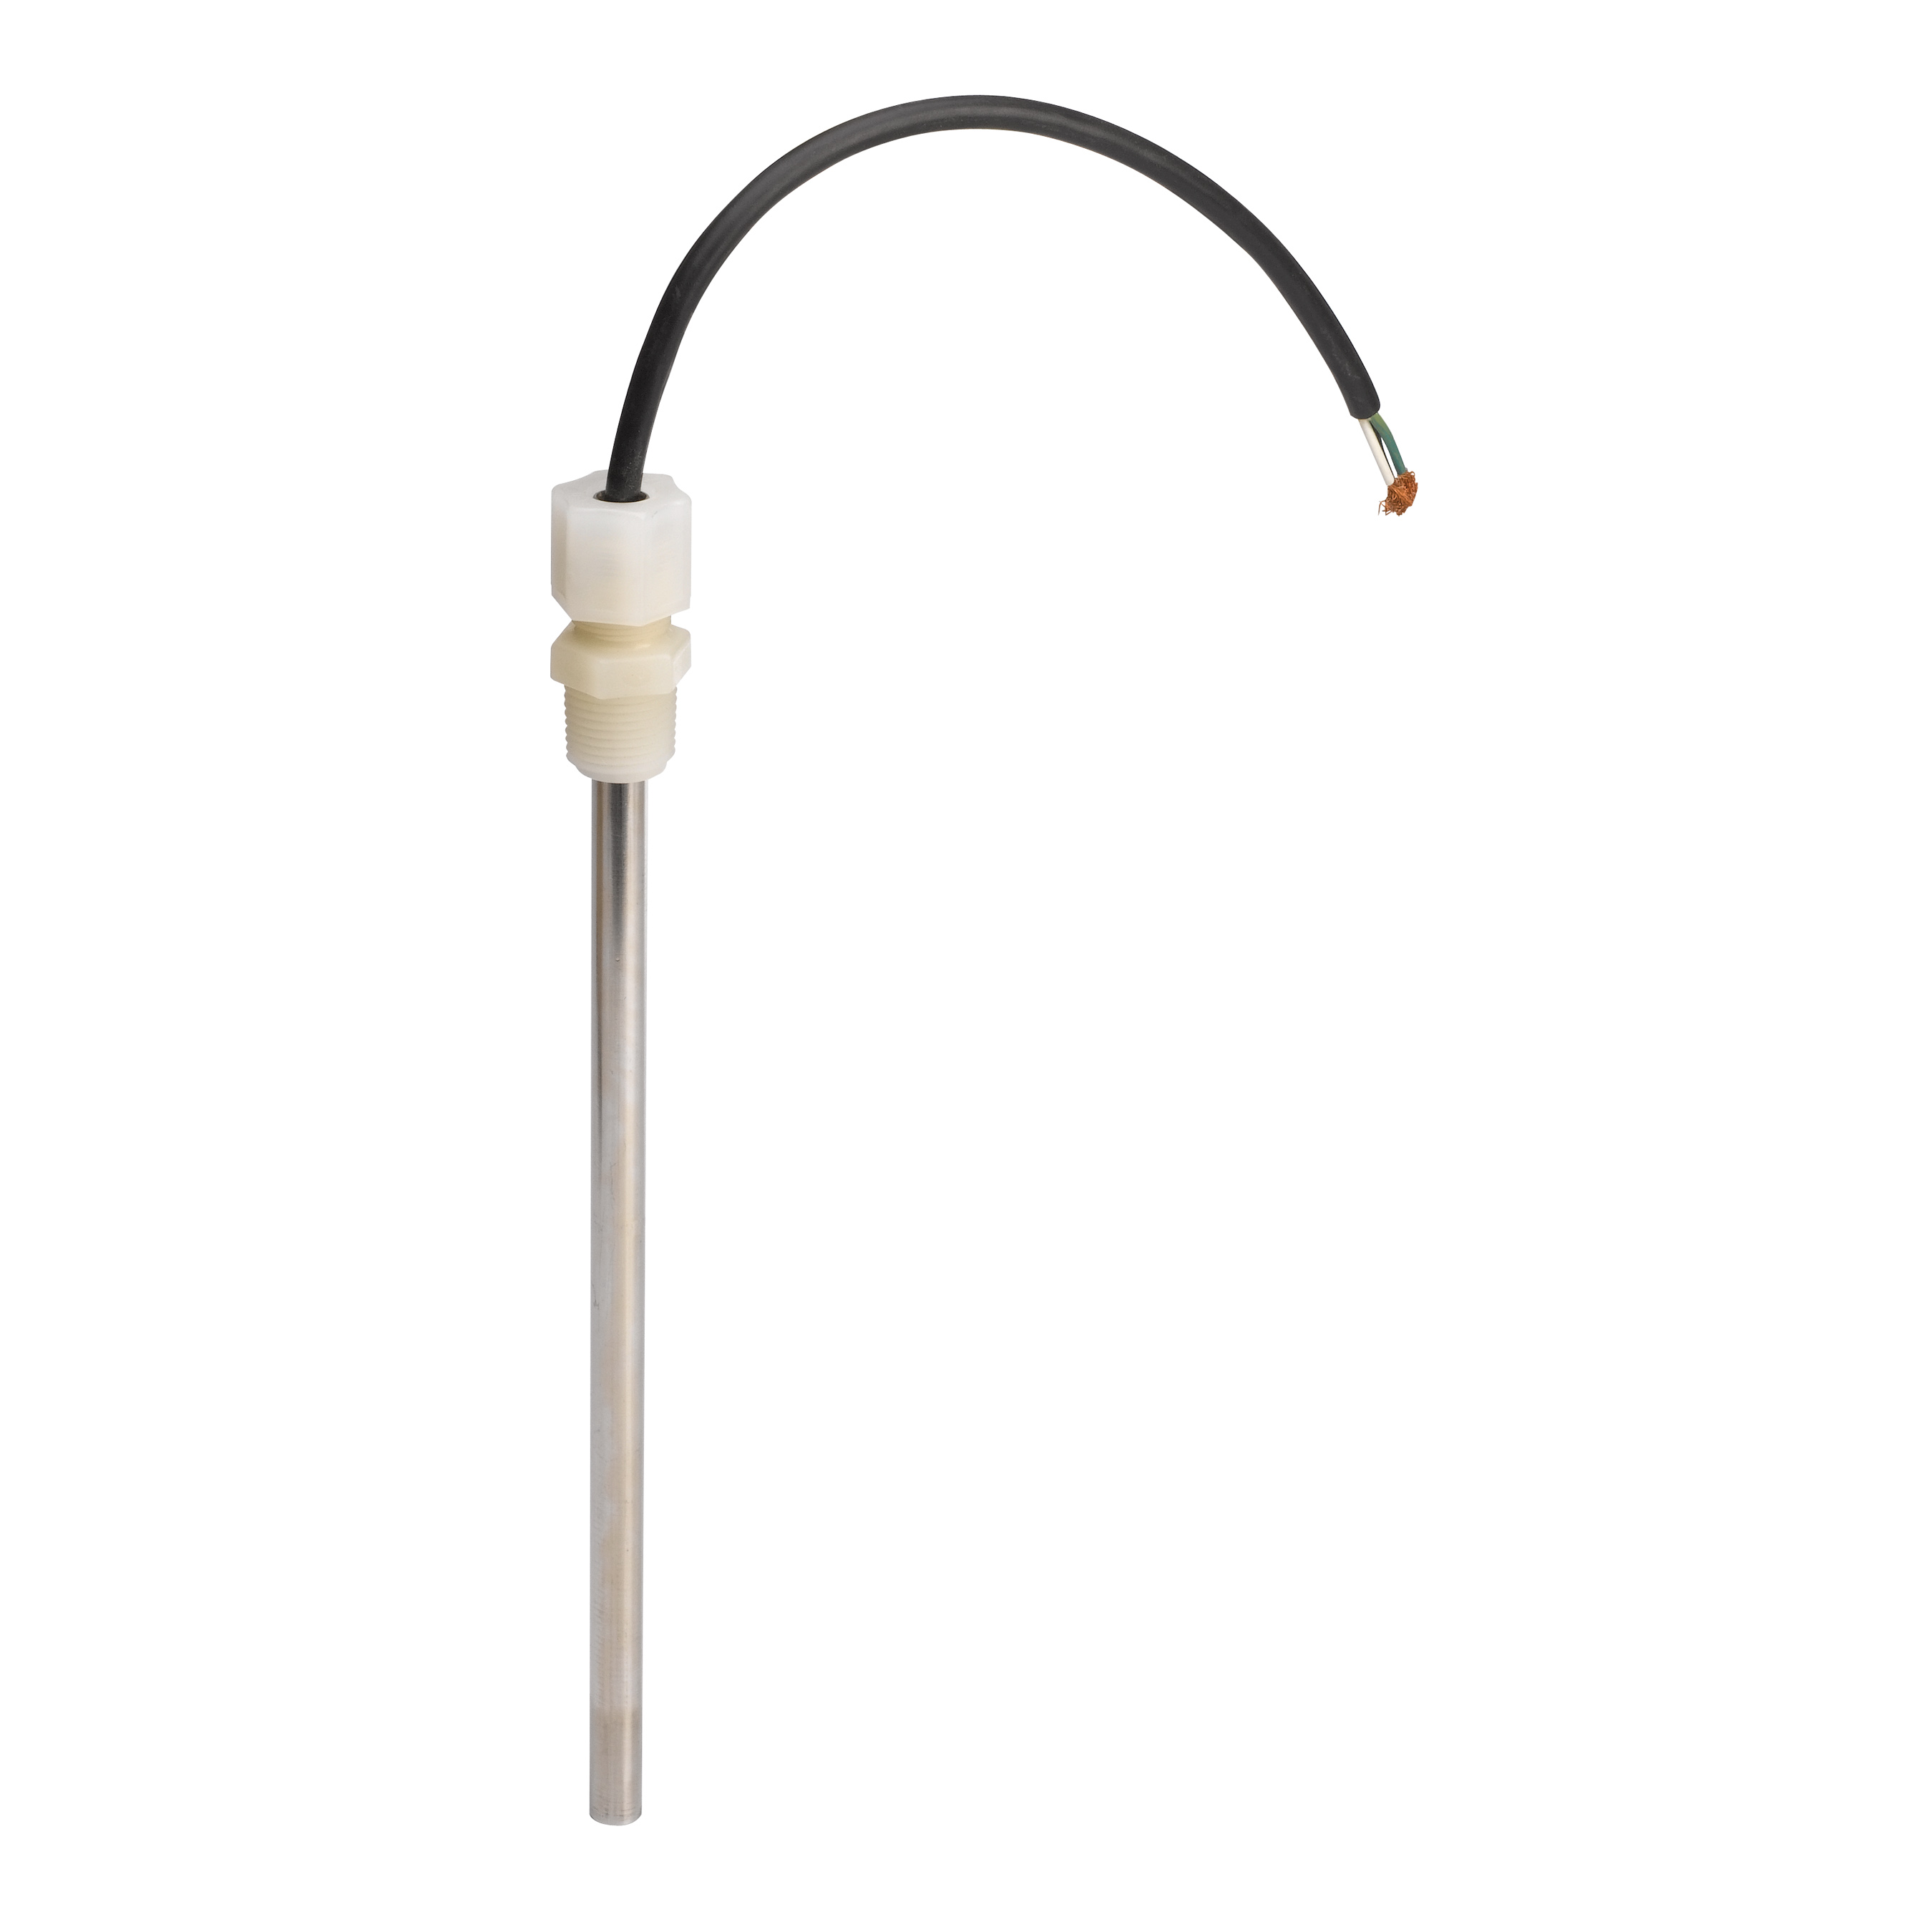 Details about   New Wiegand  MT0-2XX  Single Phase Immersion Heater 120 VAC 750 Watt 